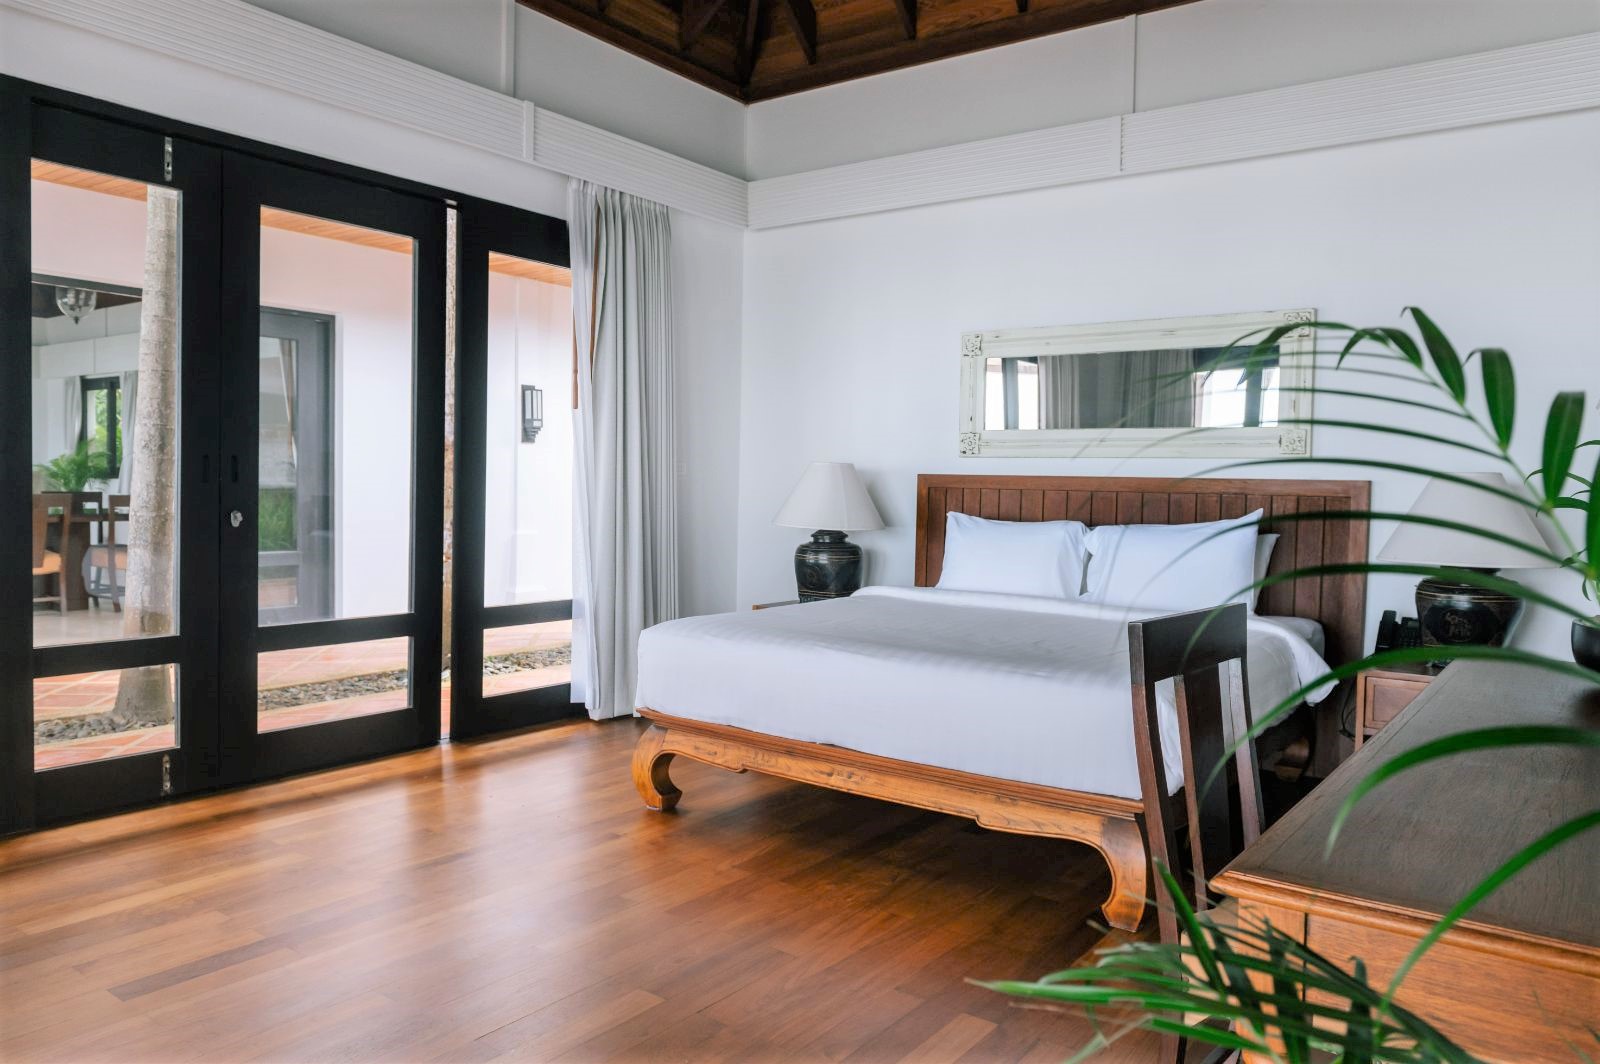 Guest bedroom at Villa Hibiscus on Koh Samui island in Thailand